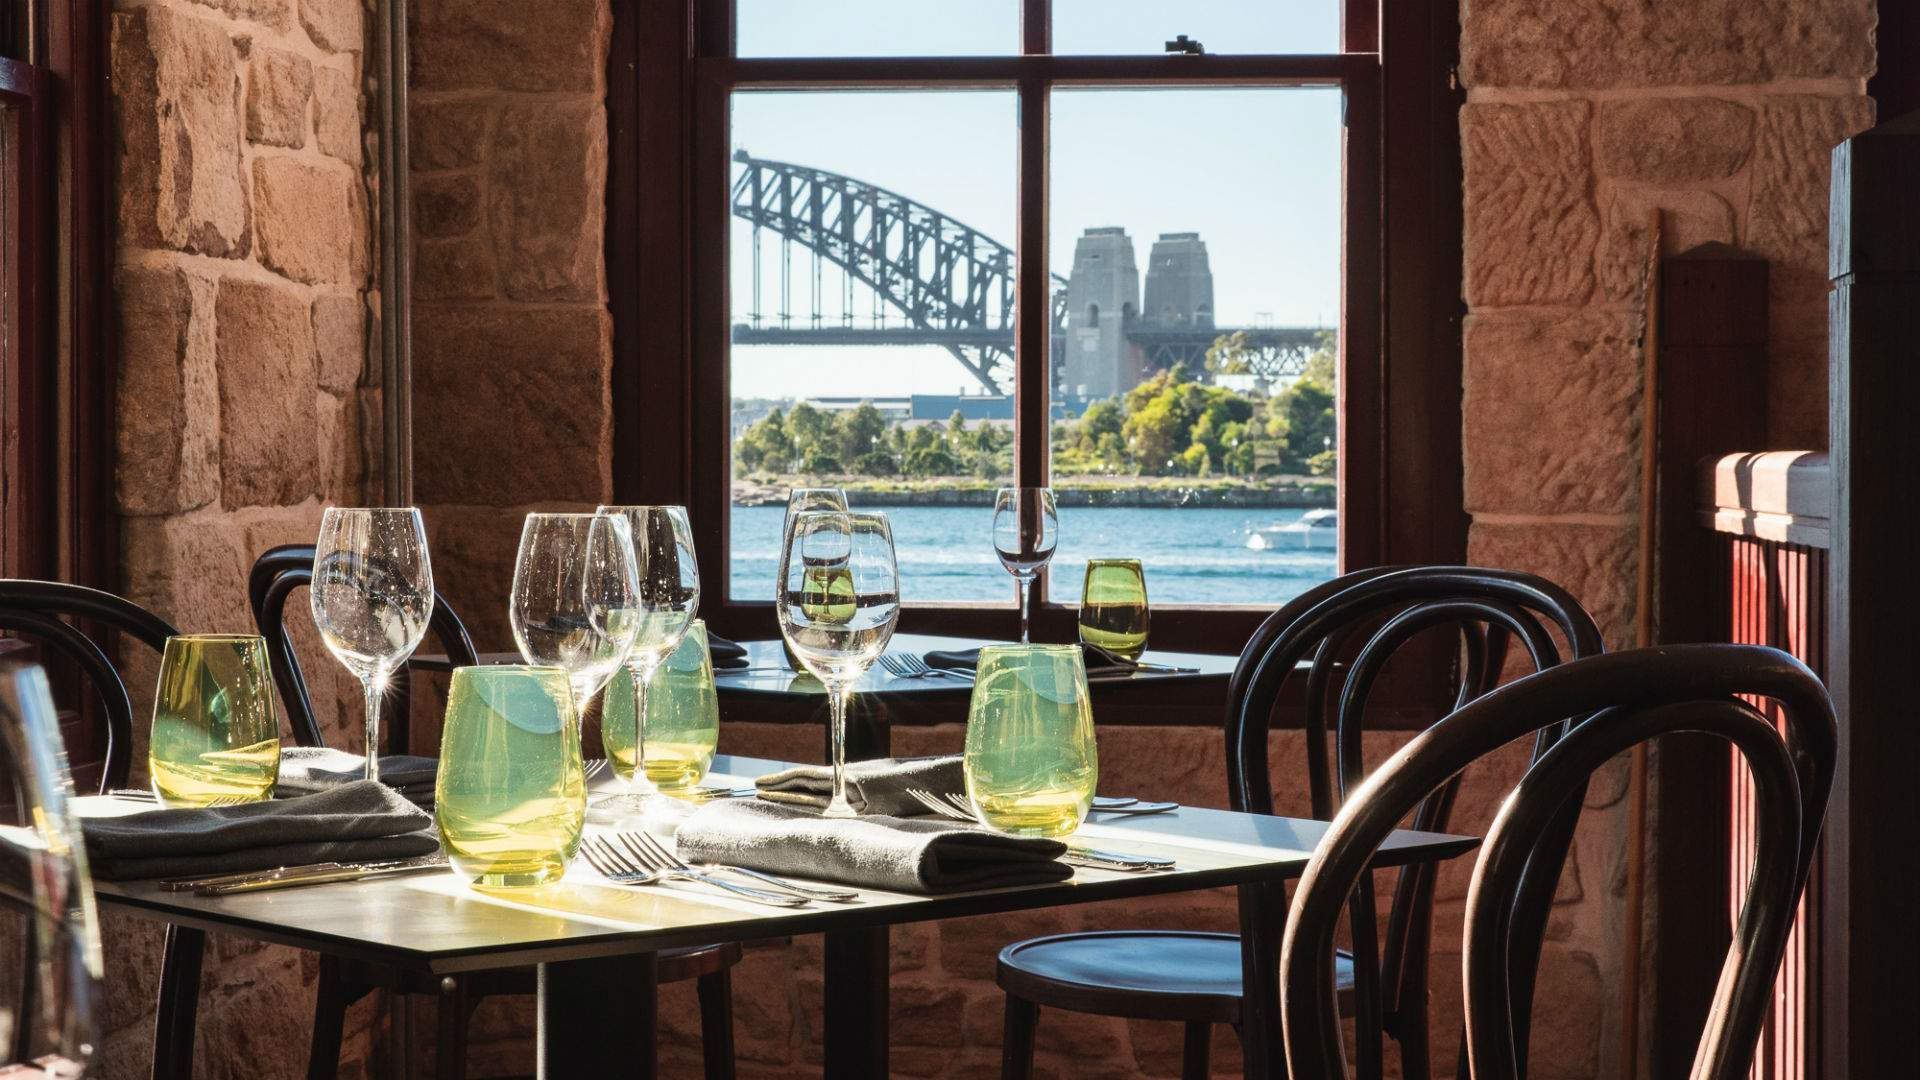 Balmain's Historic Fenwick Building Has Reopened as a Harbourside Cafe and Gallery Space